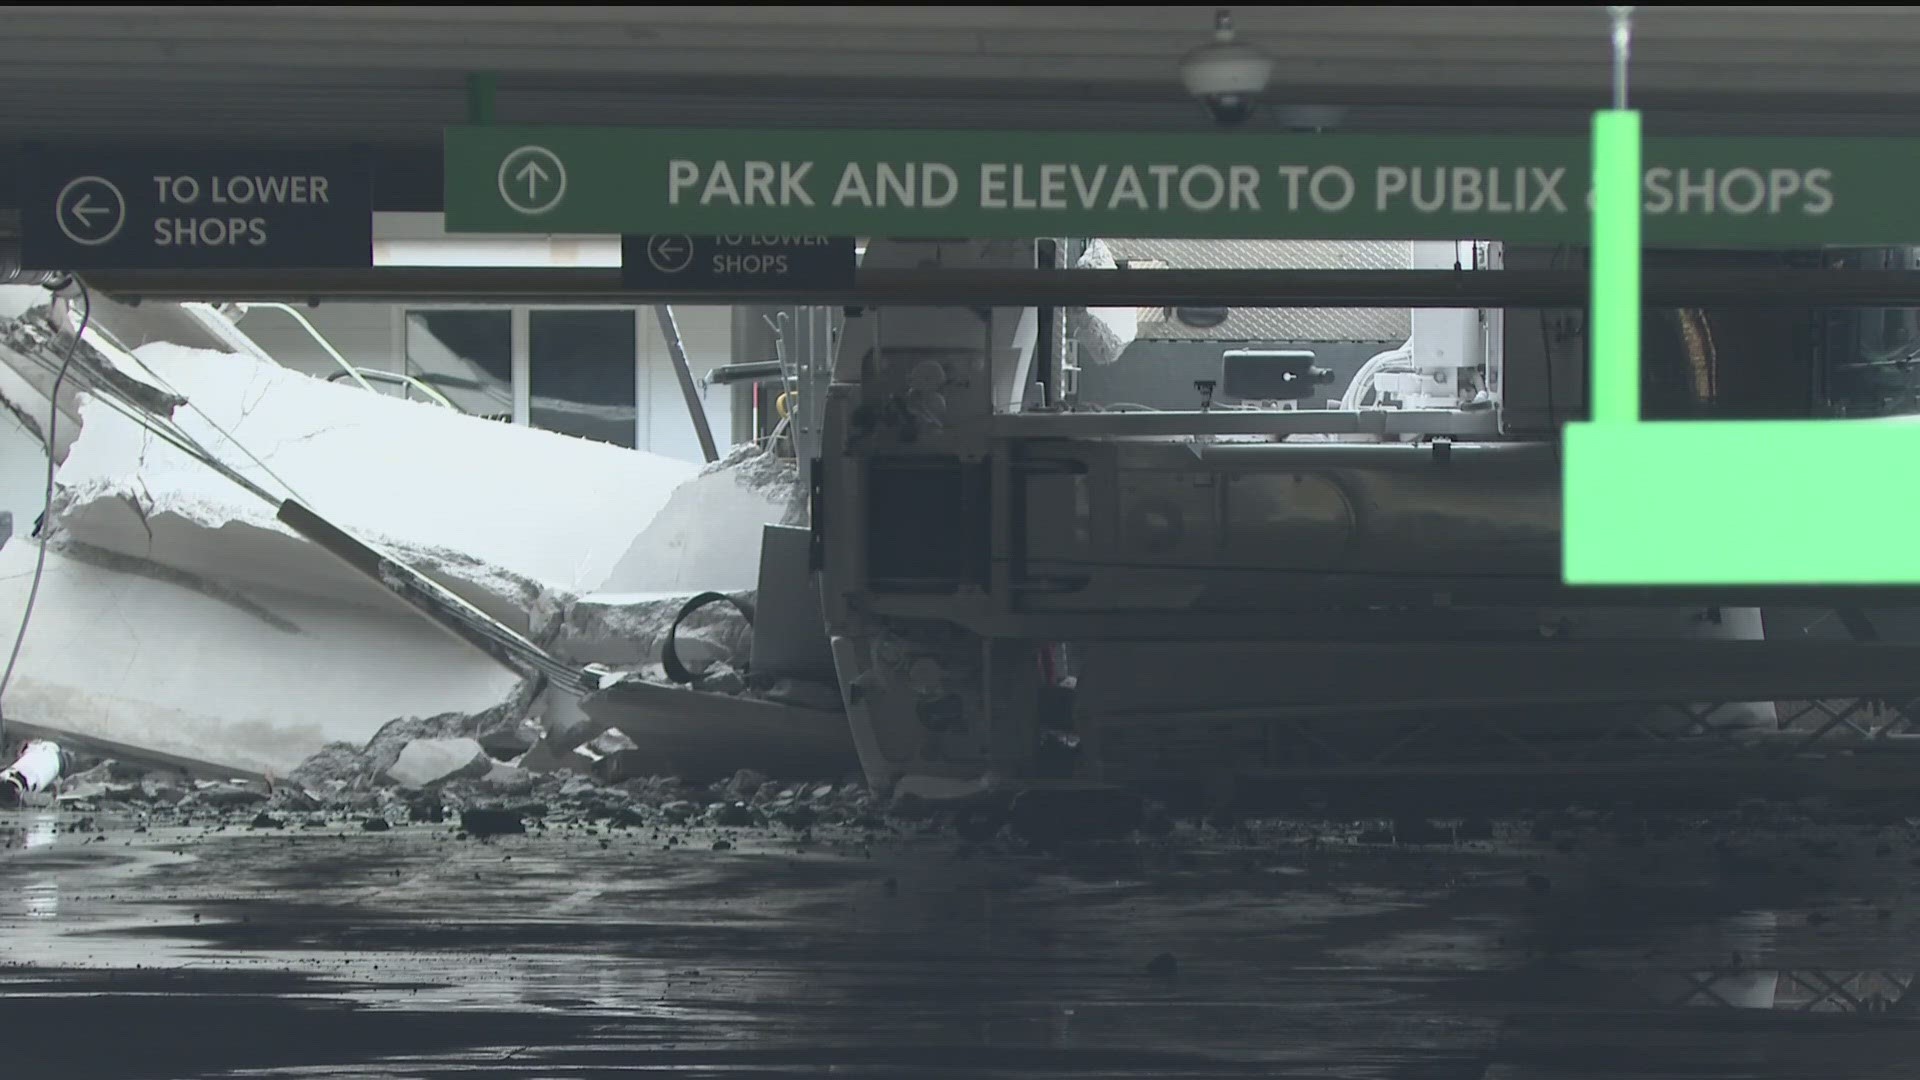 The Publix at 572 Hank Aaron Drive is not serving shoppers as it deals with the collapse.